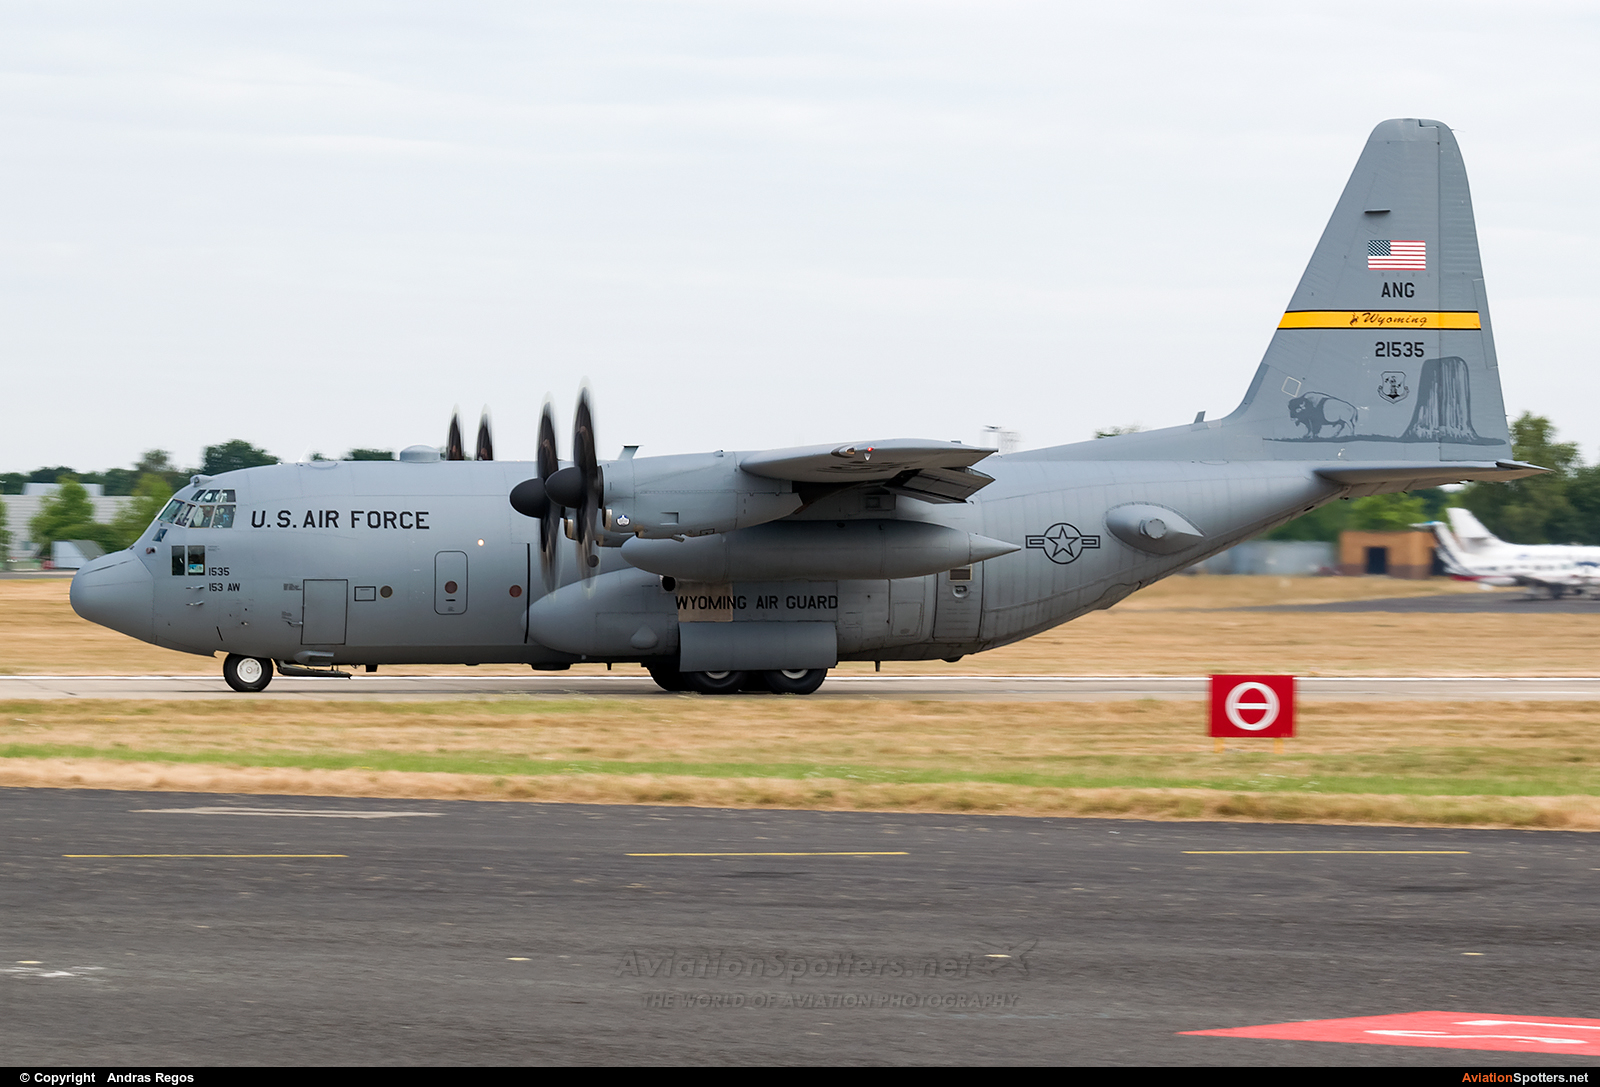 United States Air Force  -  C-130H Hercules  (92-1535) By Andras Regos (regos)